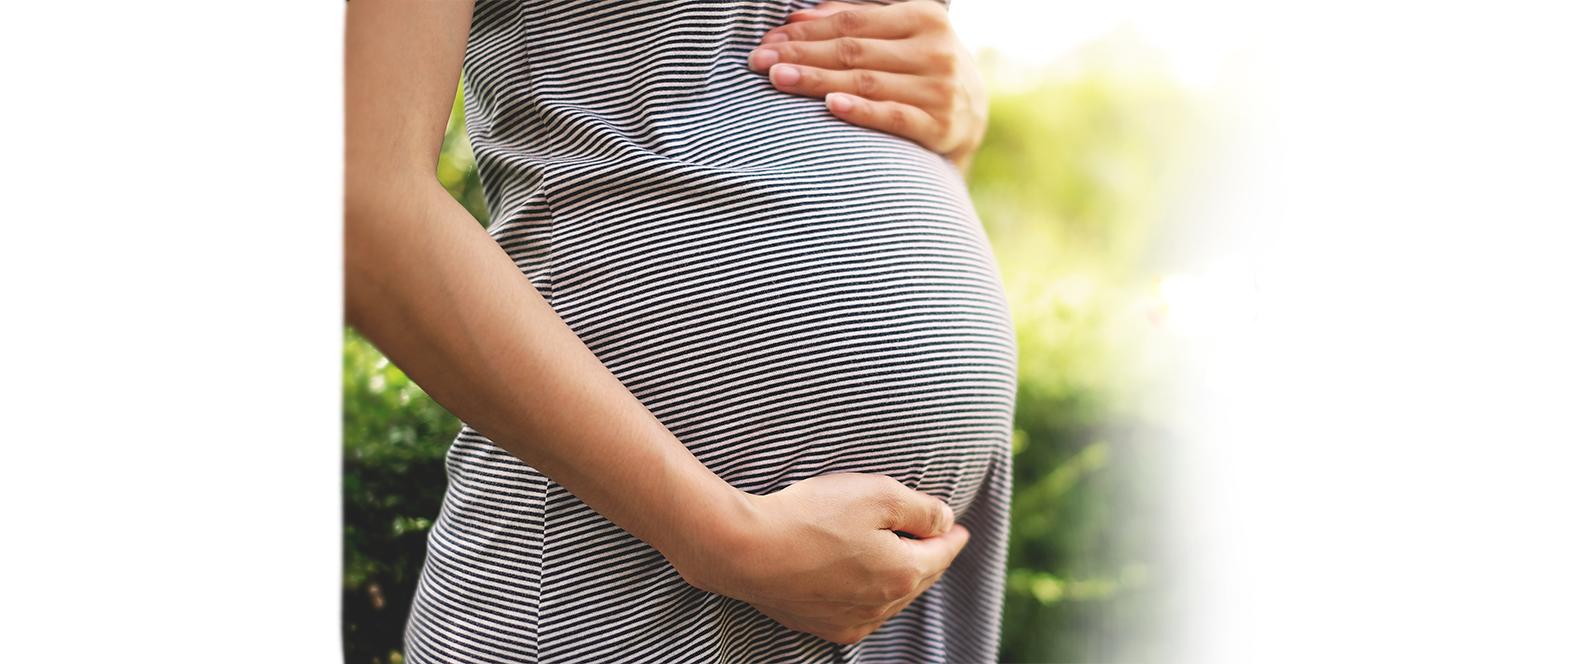 Pregnant women should take adequate care and follow recommended precautions to protect themselves against COVID-19